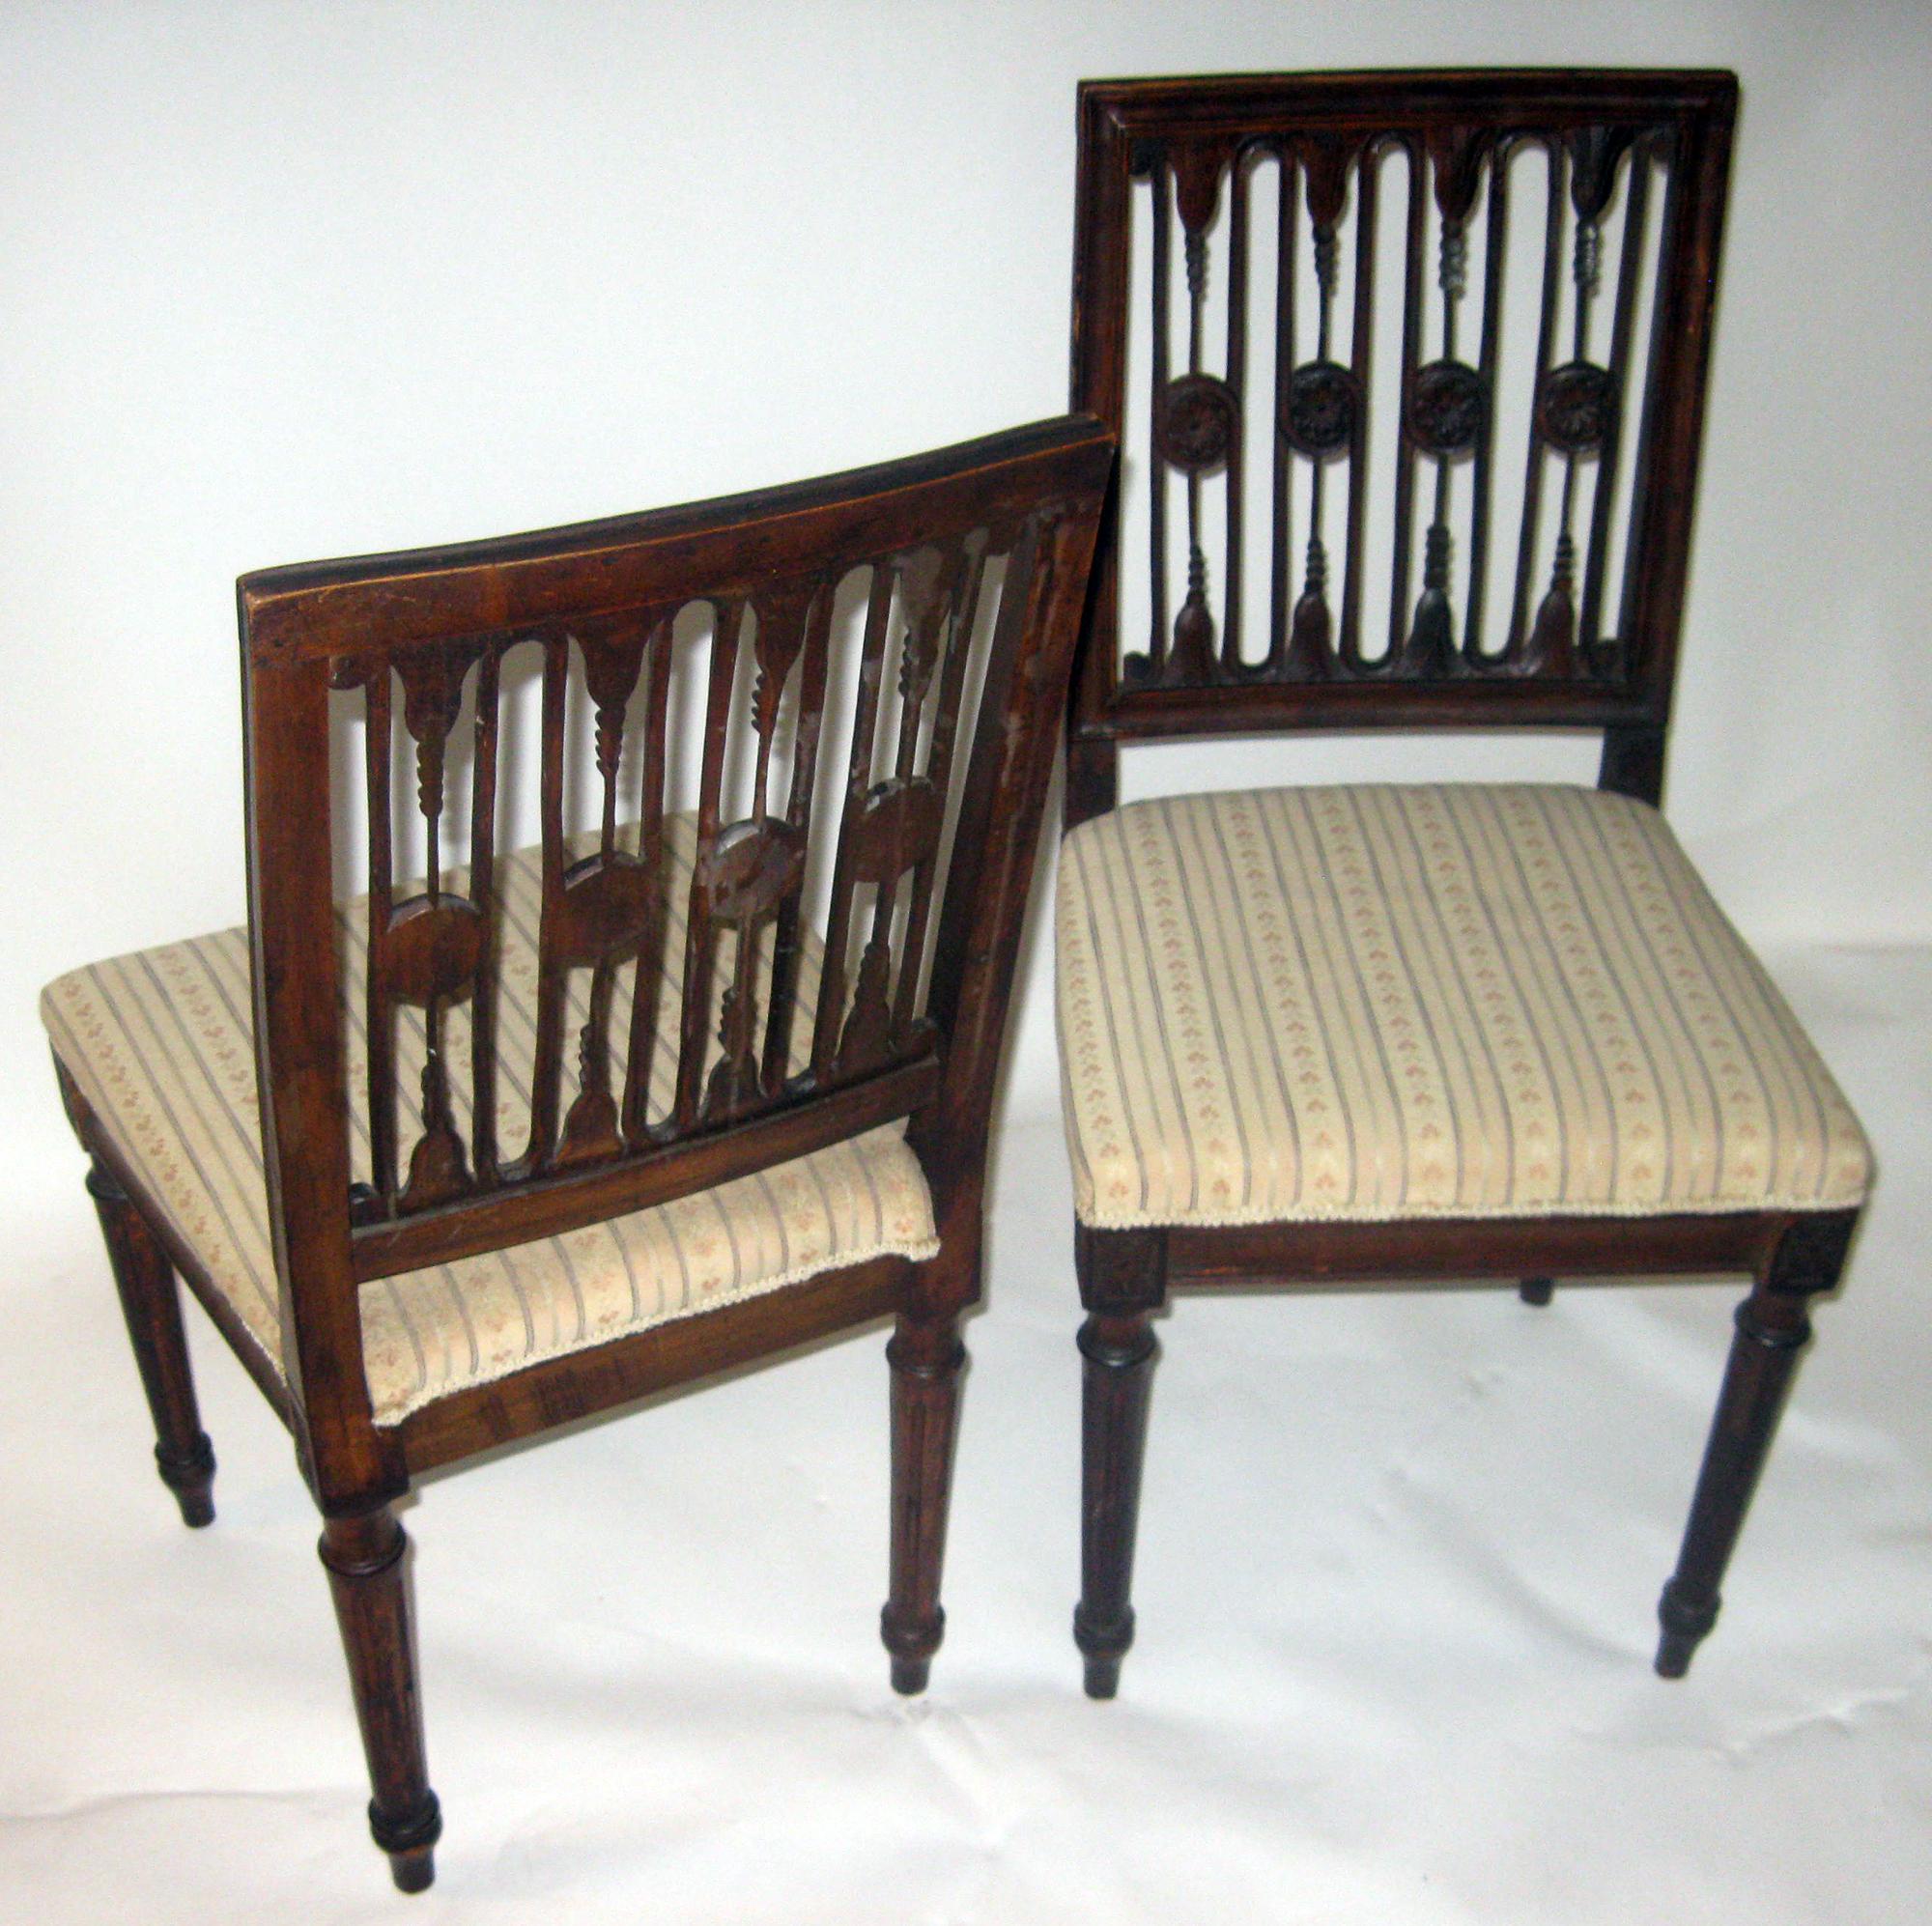 Set of two Swedish chairs with classical lotus pattern back splats, a design often attributed to the chair makers of the Stockholm Guild. The chair splats have the carved crest also typical of the Gustavian period. All four legs are carved and